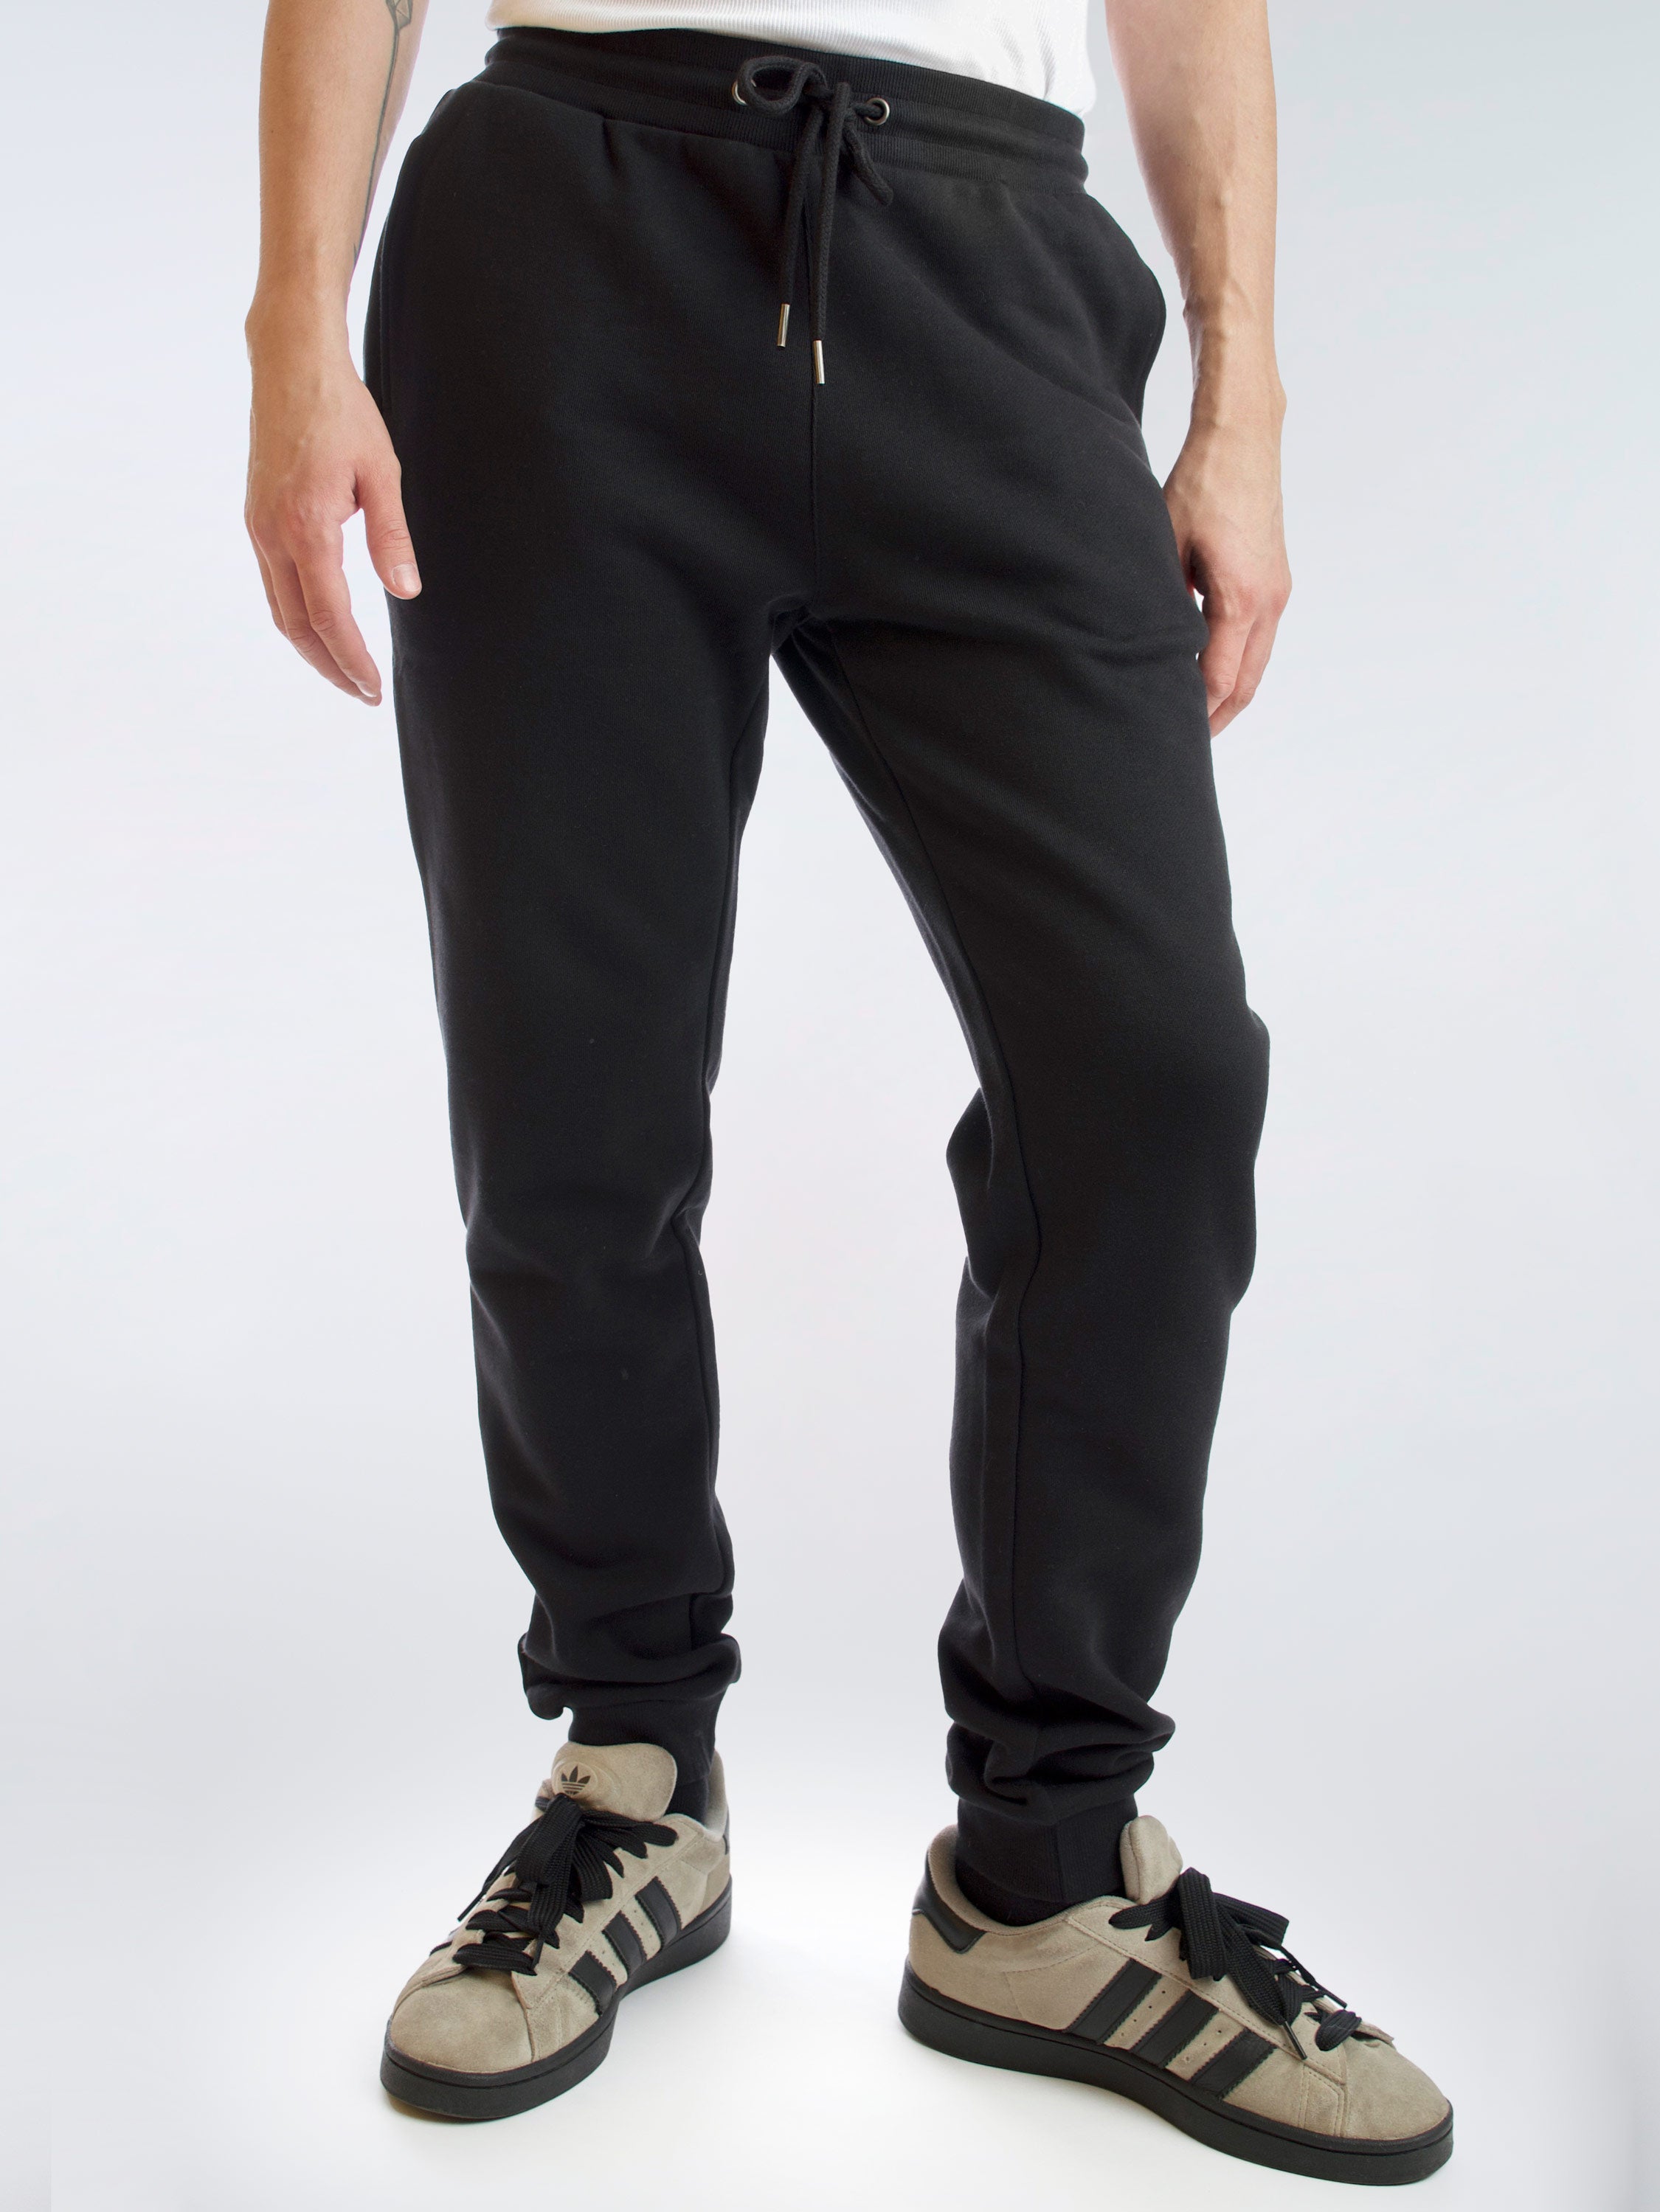  JustDay Mens Joggers Sweatpants Track Pants Sports Jogging  Pants with Zipper Pockets Black Small : Clothing, Shoes & Jewelry